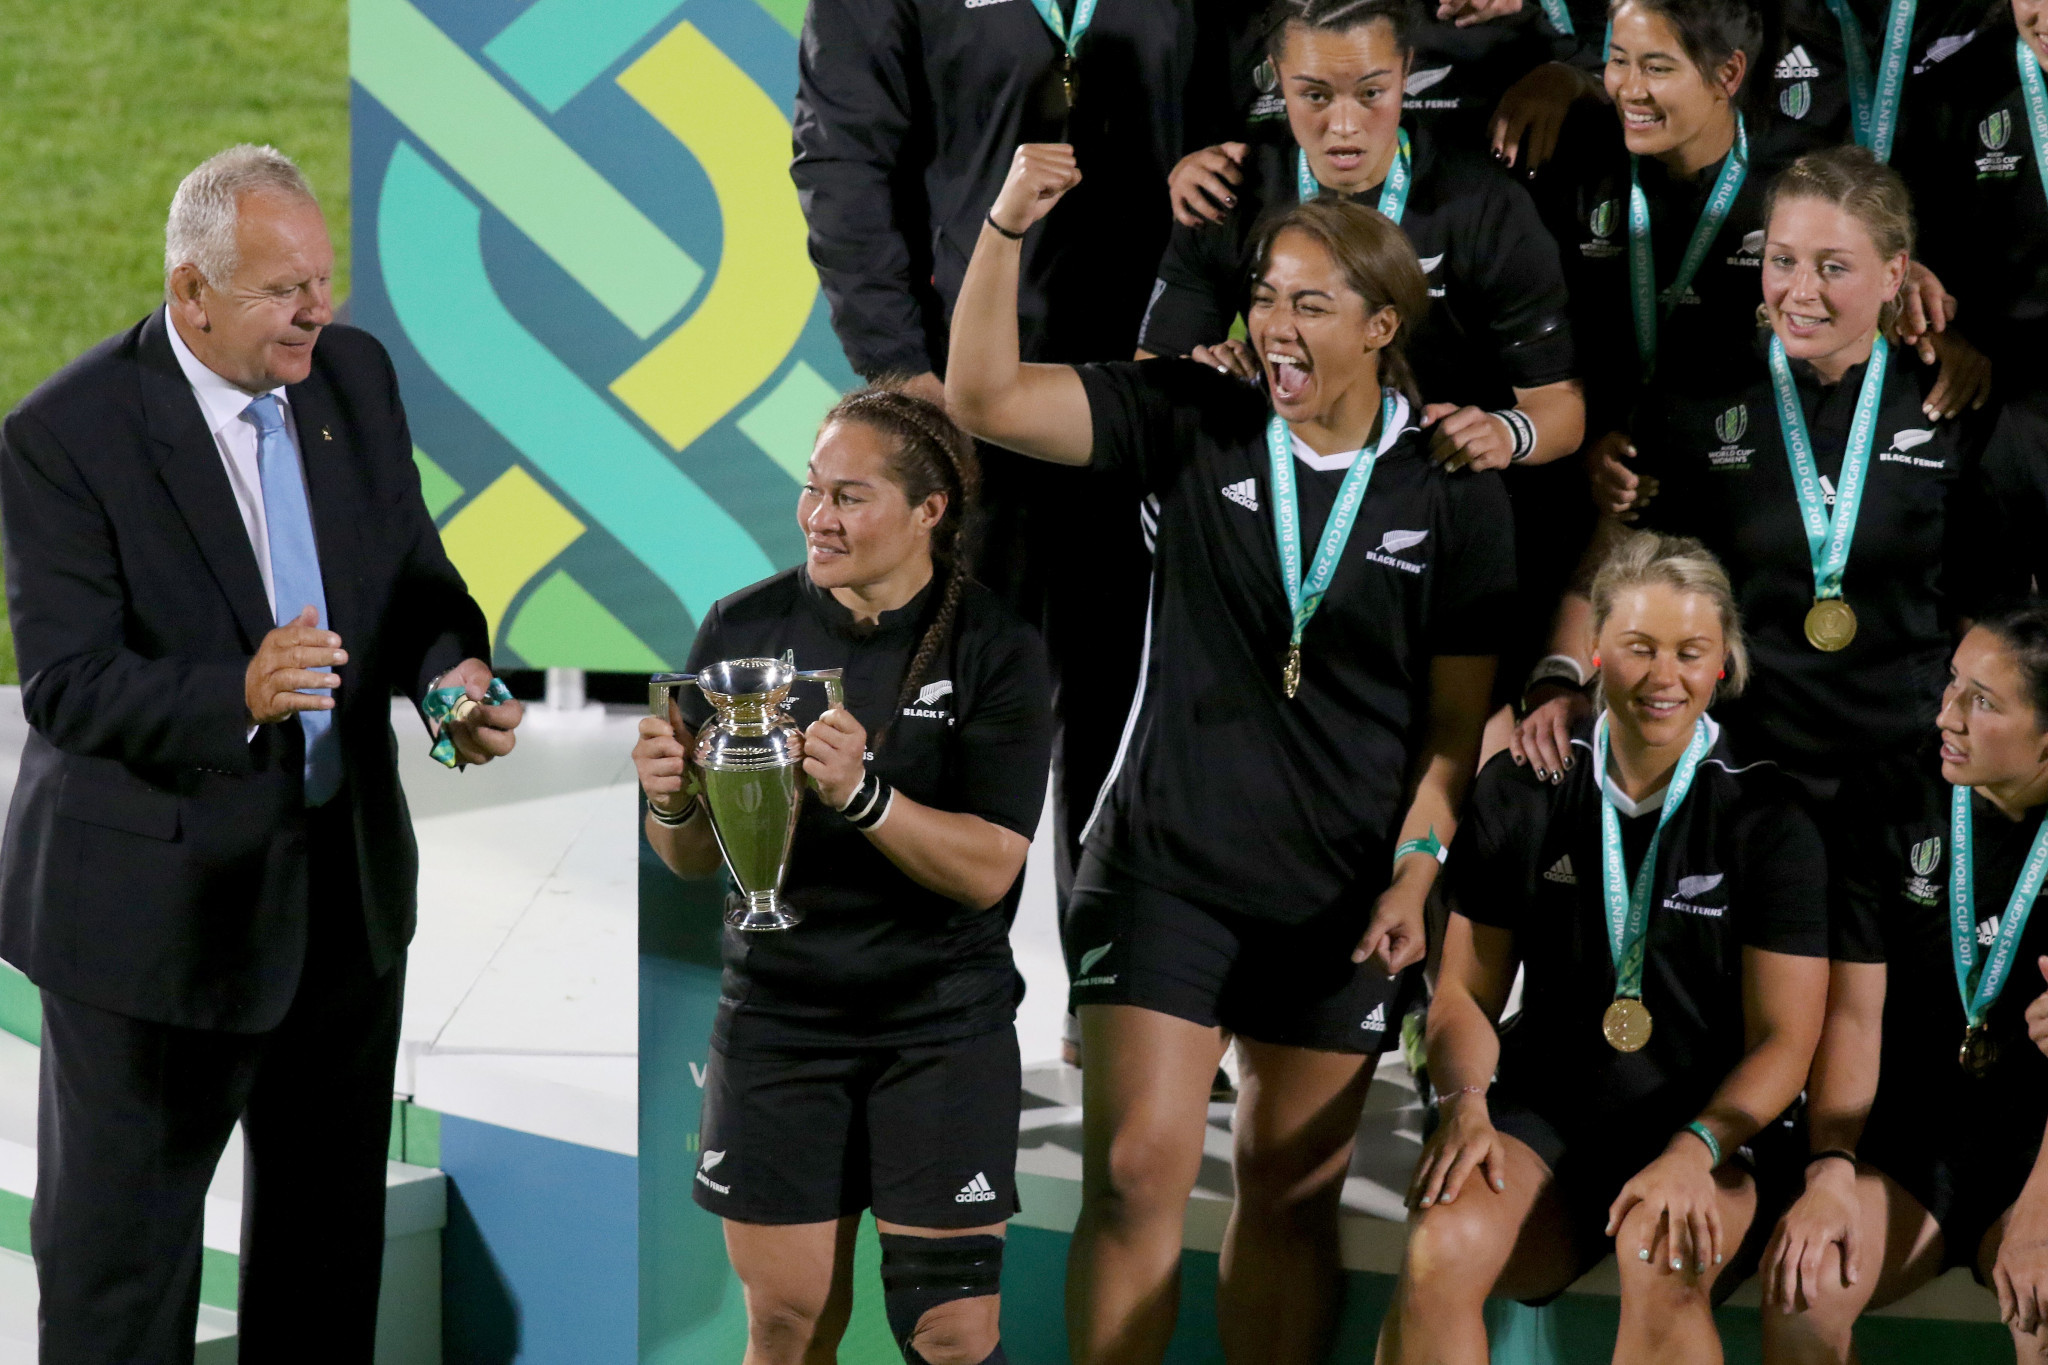 A successful Women's Rugby World Cup in Ireland in 2017 was part of the growing influence of females on the sport during his first four-year term as World Rugby chairman, Sir Bill Beaumont claimed ©Getty Images